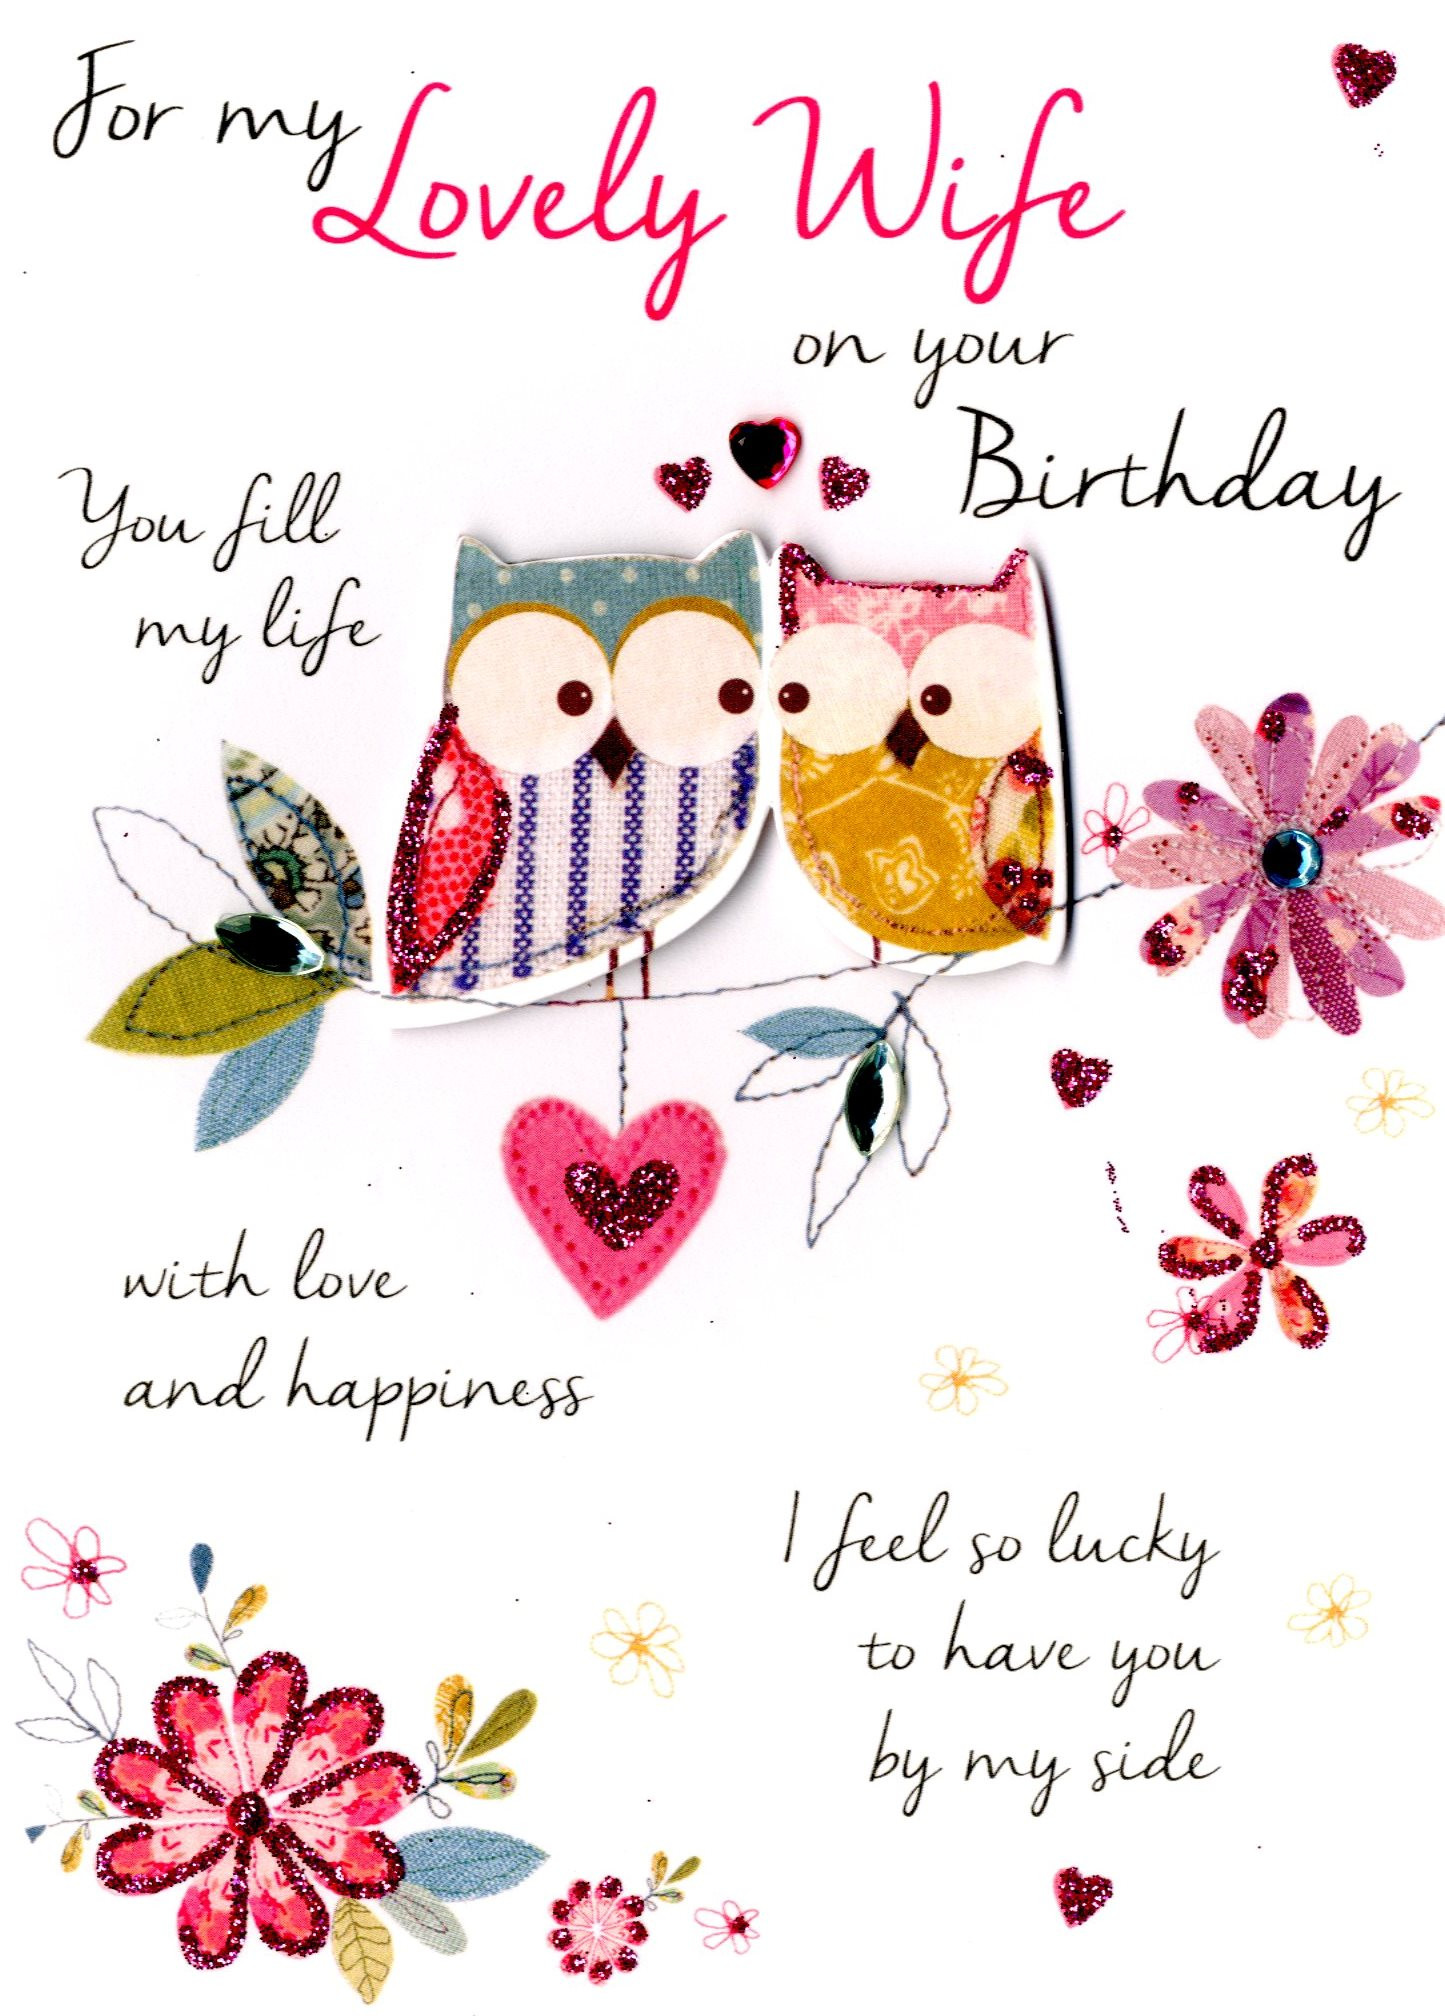 Wife Birthday Card Message
 Lovely Wife Birthday Greeting Card